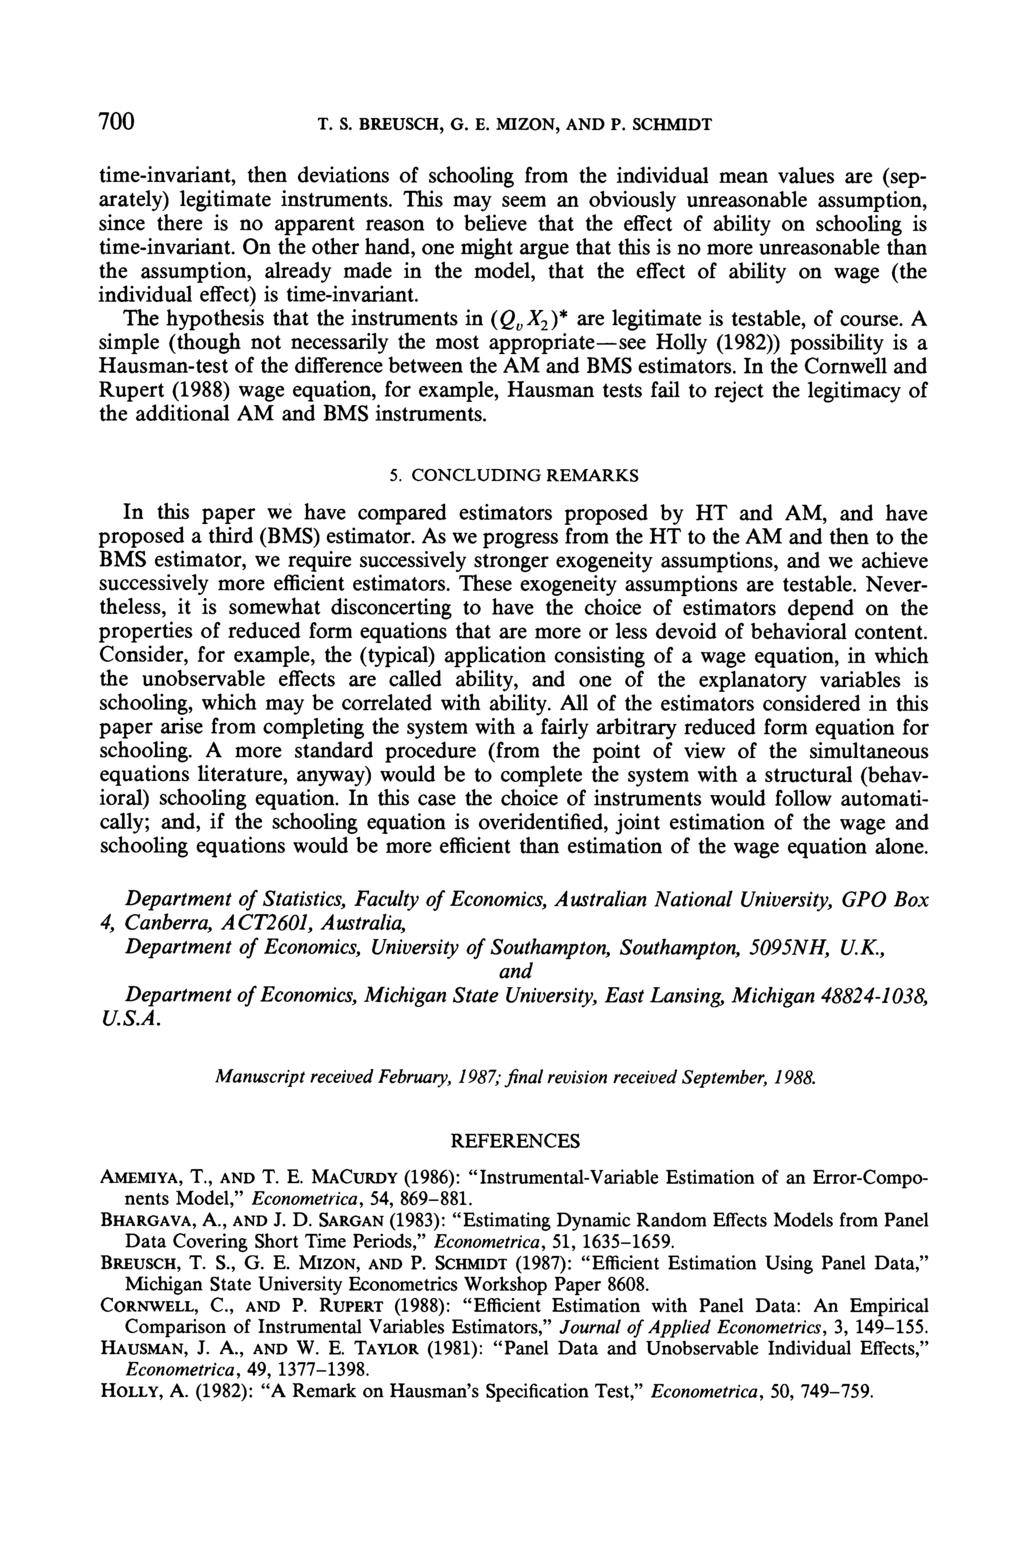 700 T. S. BREUSCH, G. E. MIZON,AND P. SCHMIDT time-invariant, then deviations of schooling from the individual mean values are (separately) legitimate instruments.